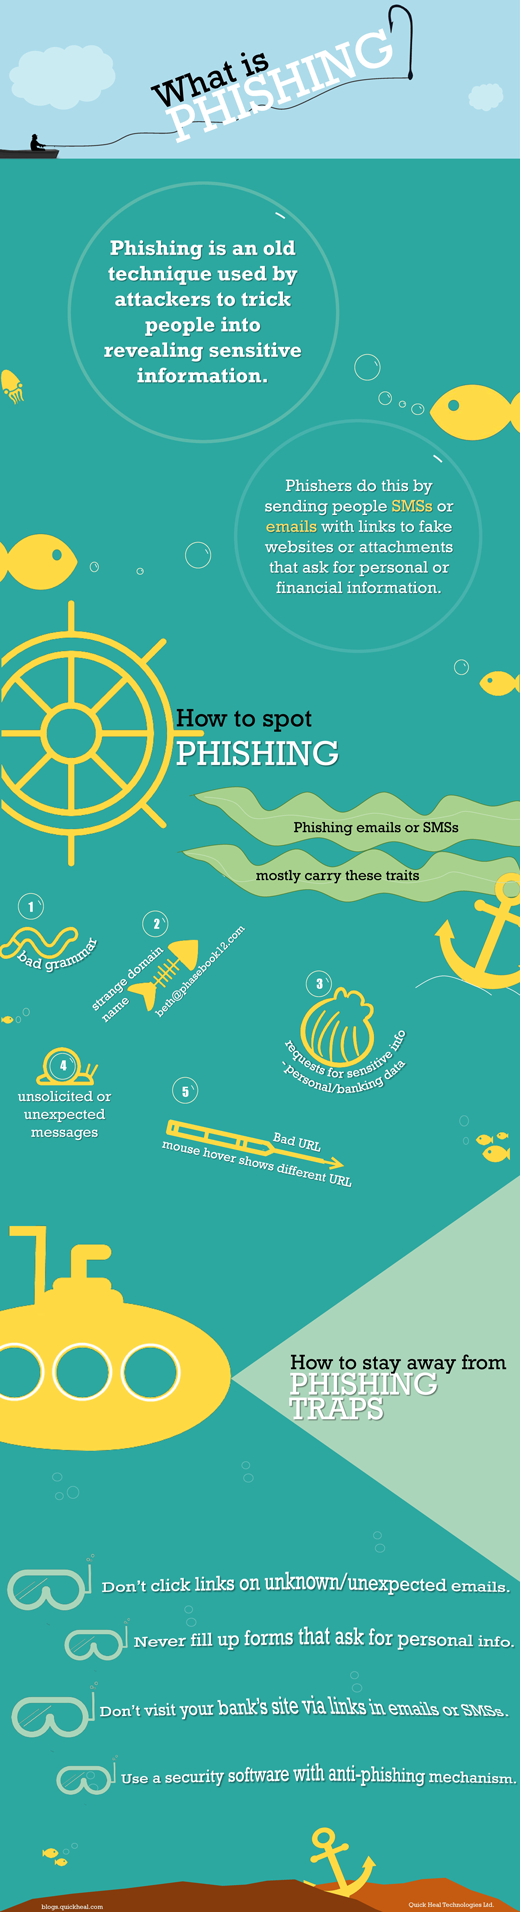 What-is-phishing_featured